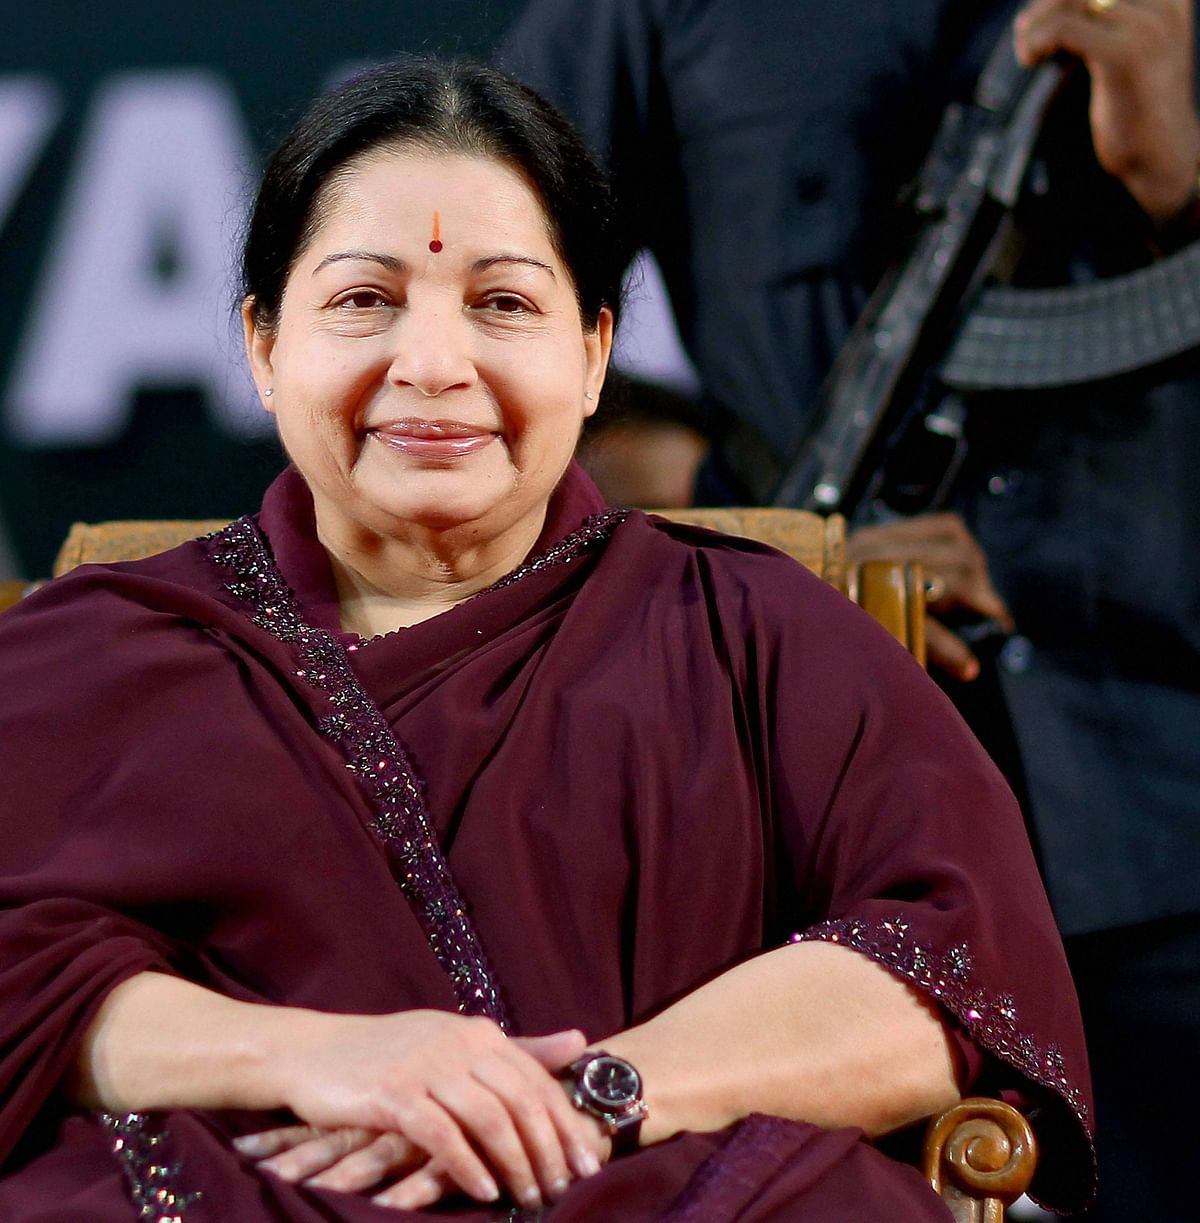 When Jayalalithaa supported scrapping of Art 370 in RS